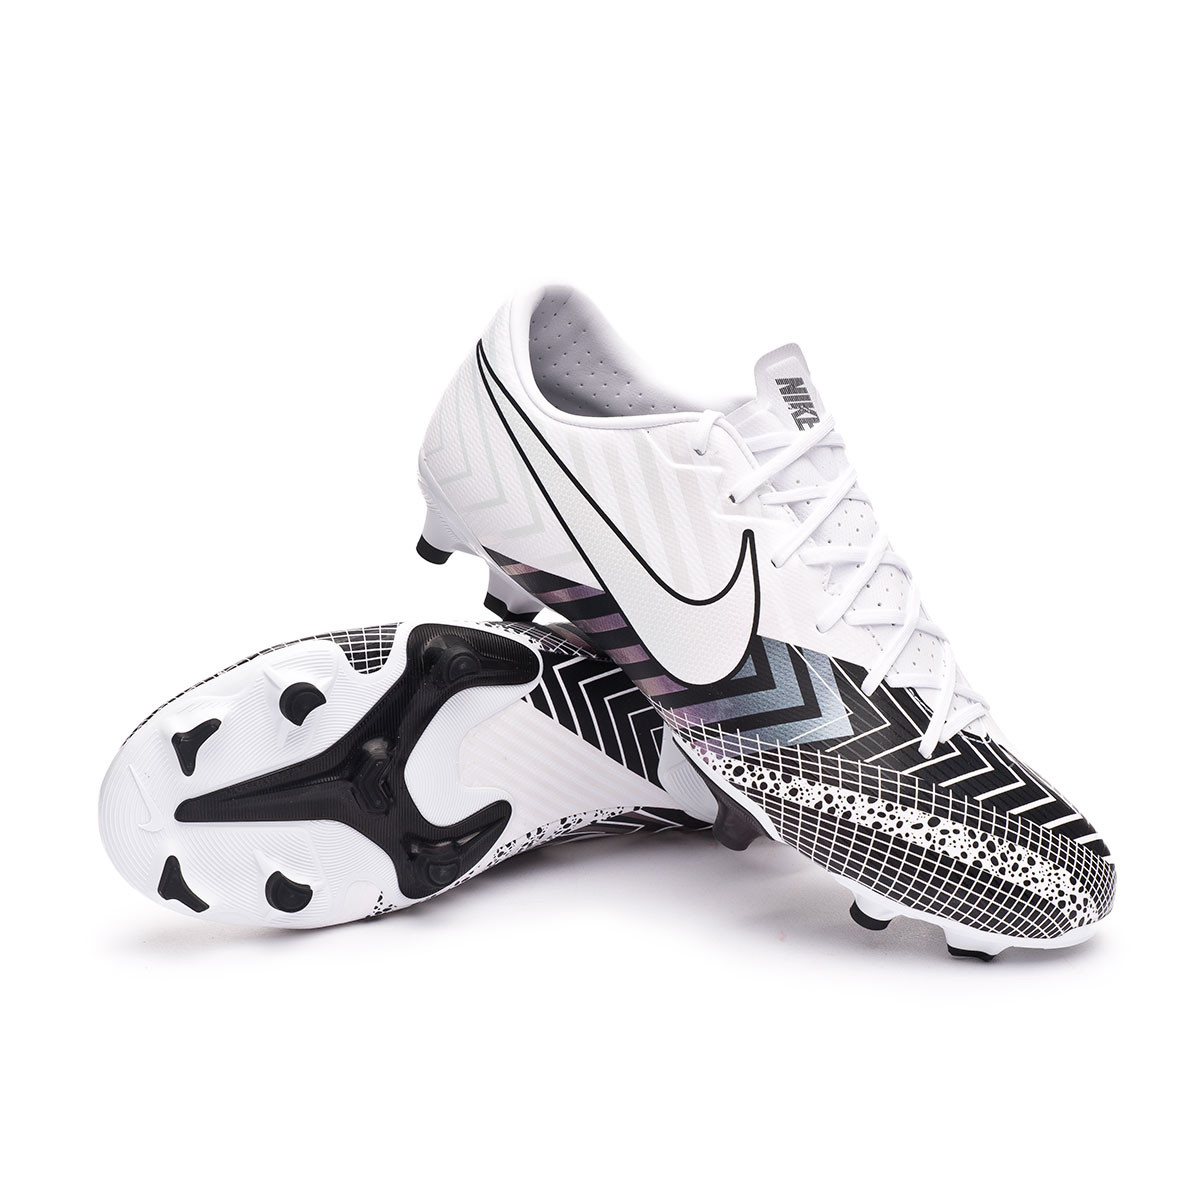 best football shoes 217